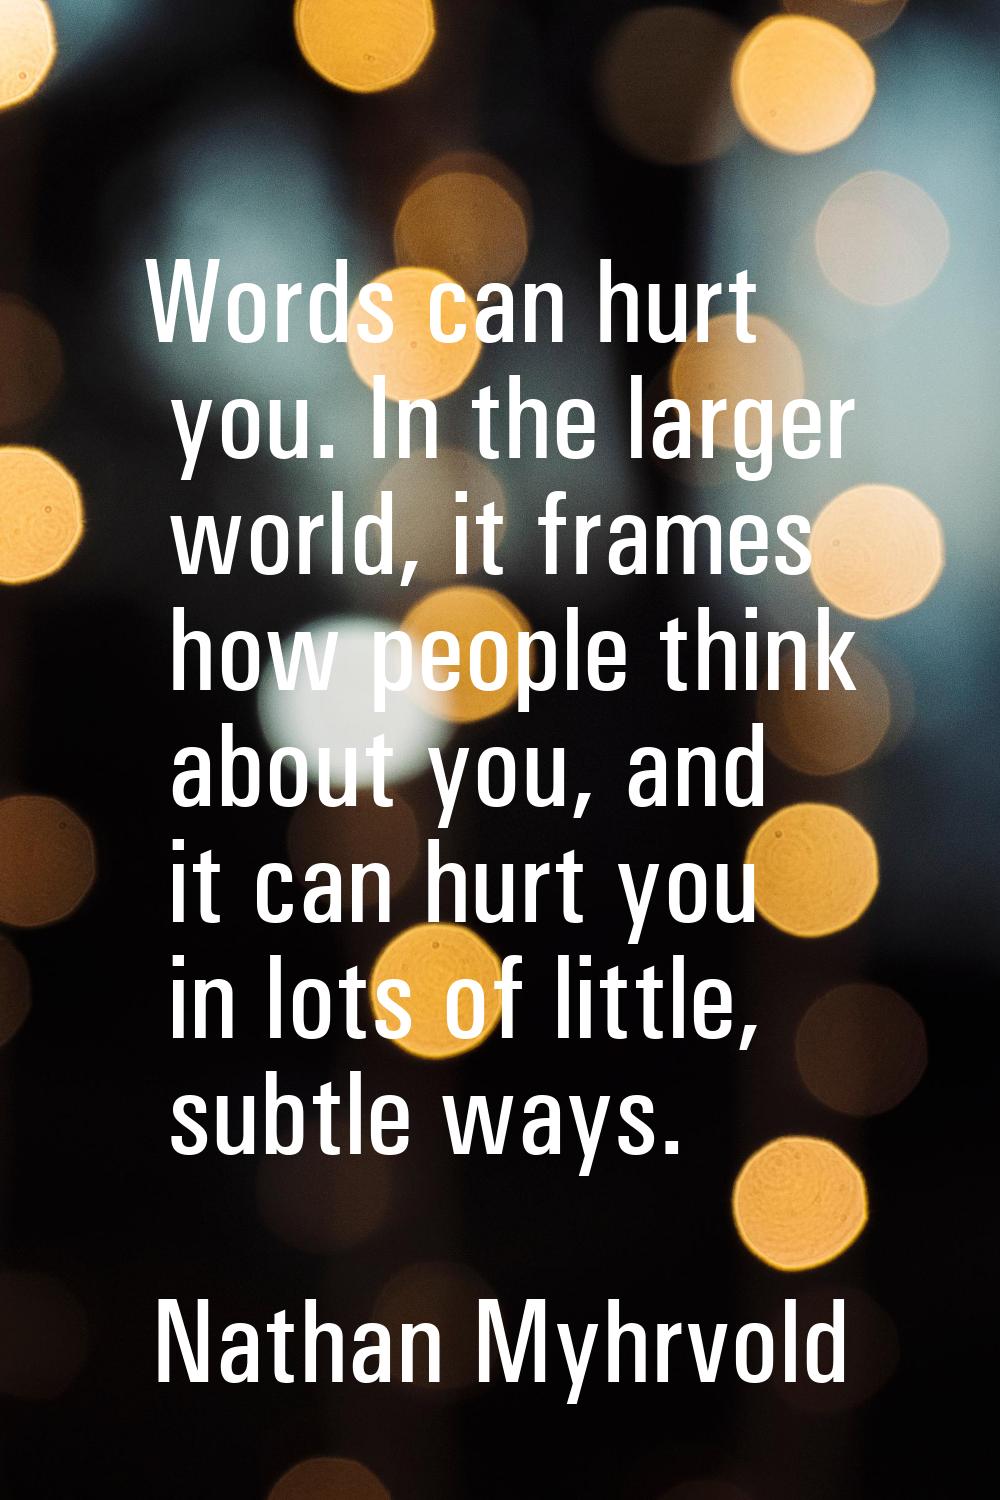 Words can hurt you. In the larger world, it frames how people think about you, and it can hurt you 